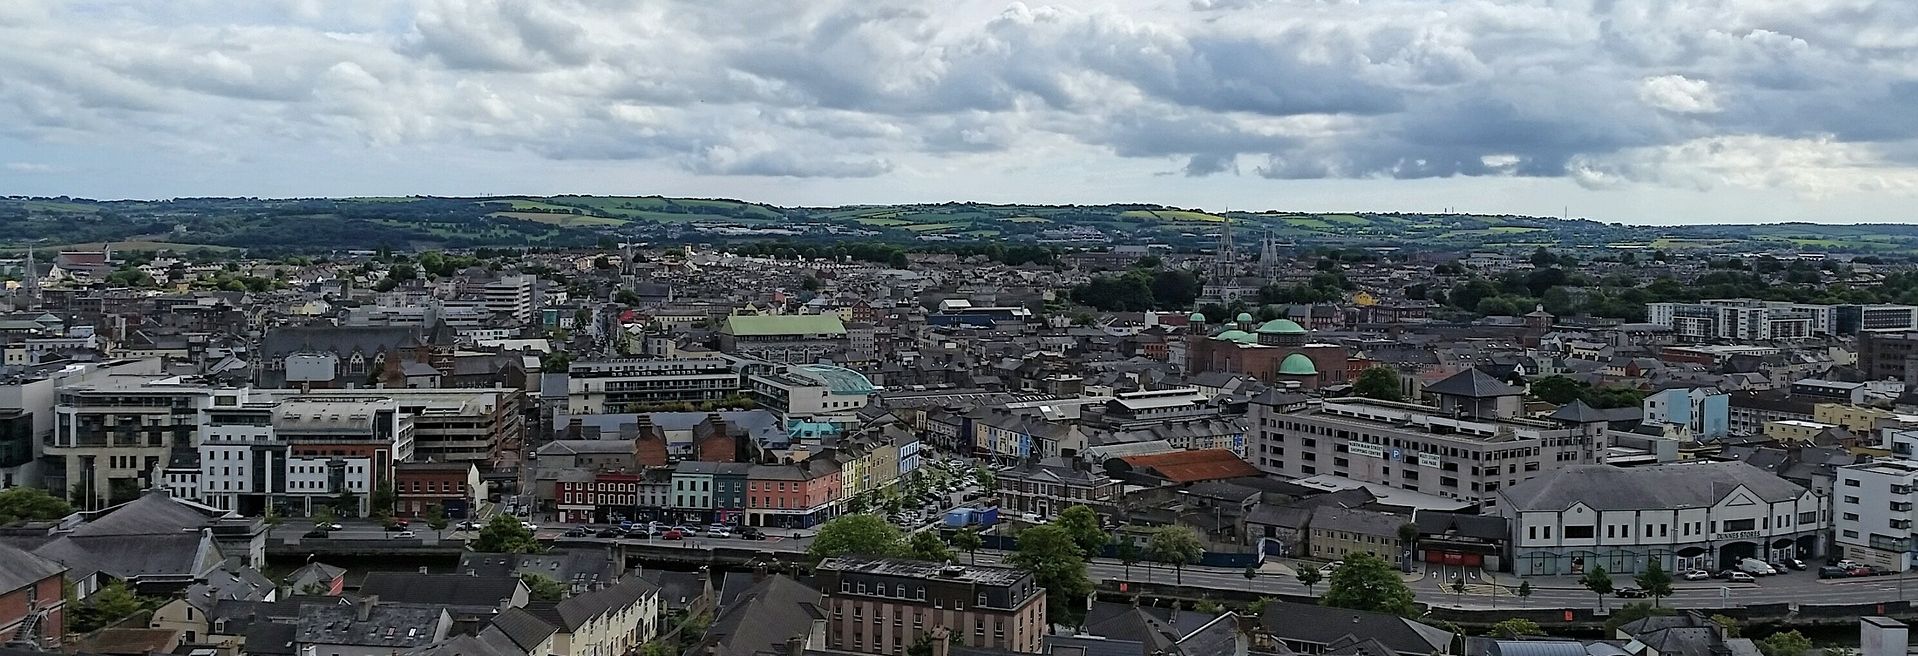 A panoramic view of the city of Cork, Ireland